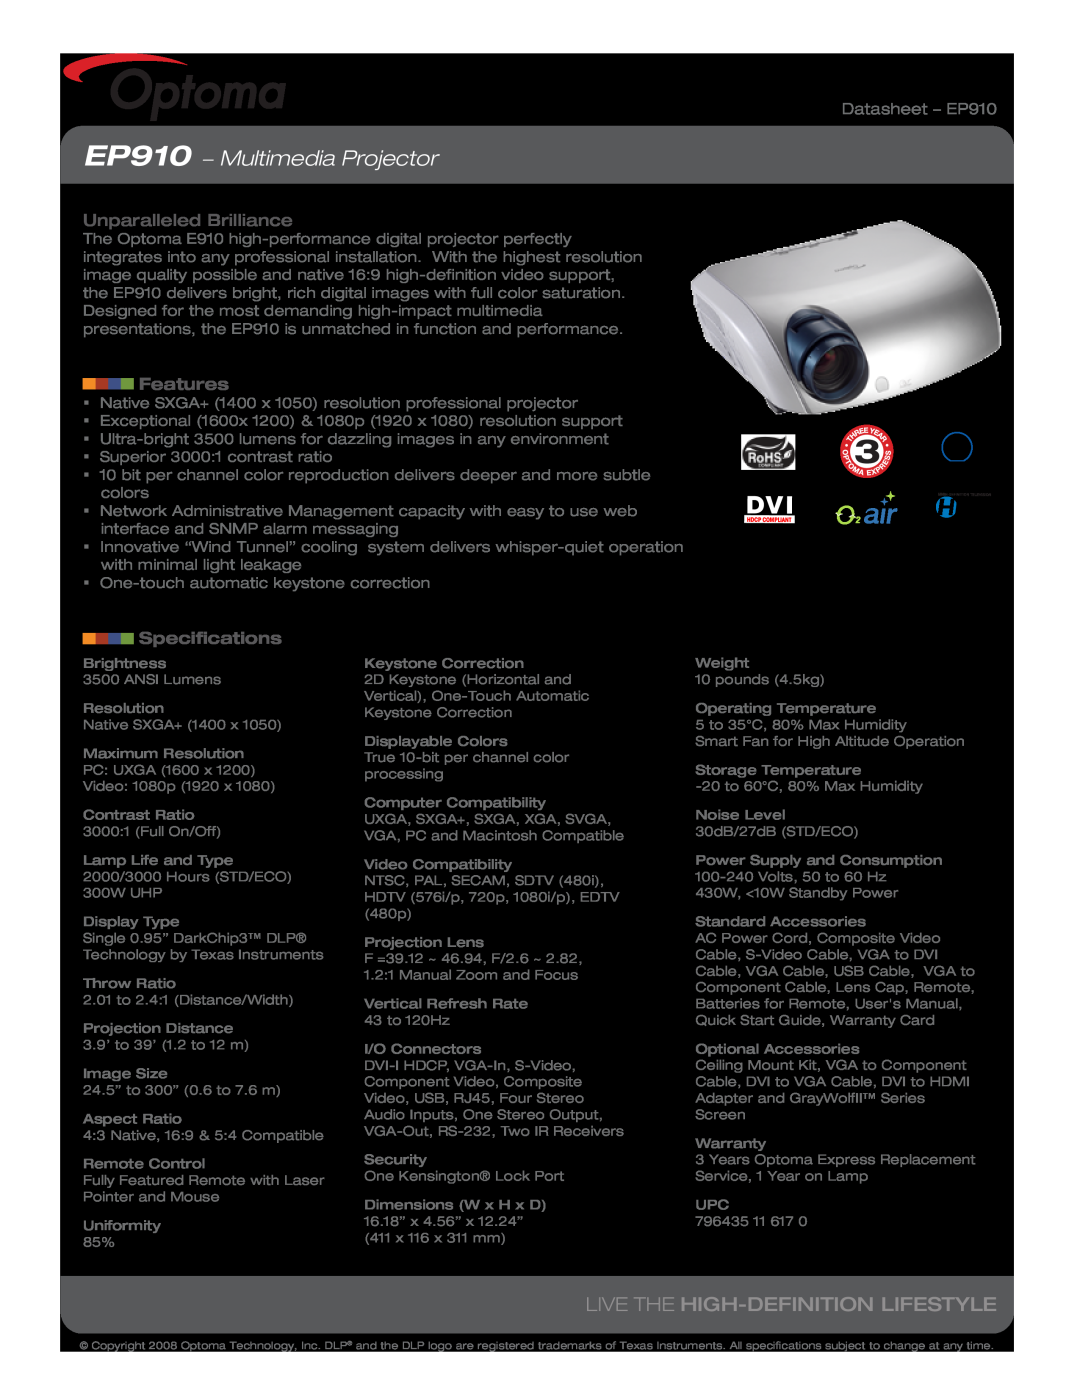 Optoma Technology specifications EP910 − Multimedia Projector, Live The High-Definition Lifestyle, Features 